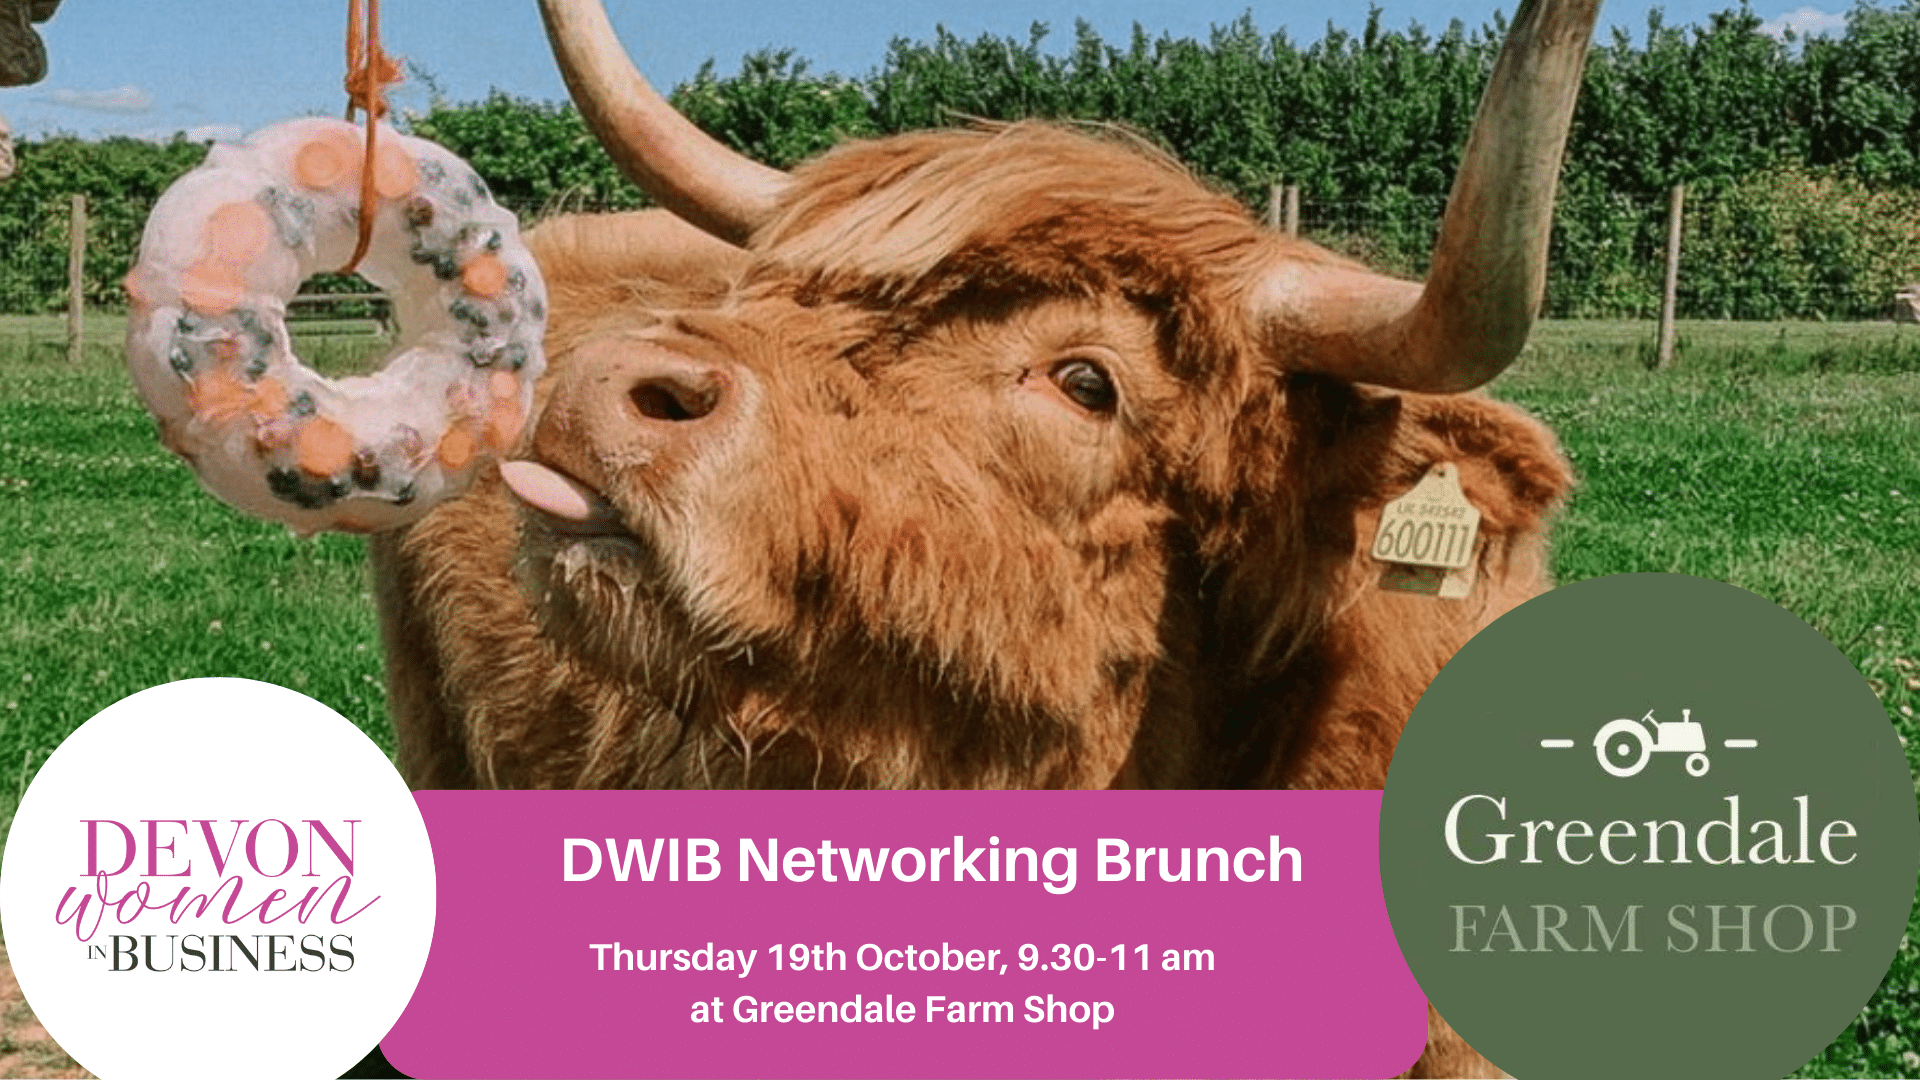 Photo of a cow licking a doughnut-shaped salt lick. Logos: Devon Women in Business and Greendale Farm Shop. Text: DWIB Networking Brunch Thursday 19th October 9.30-11 am.